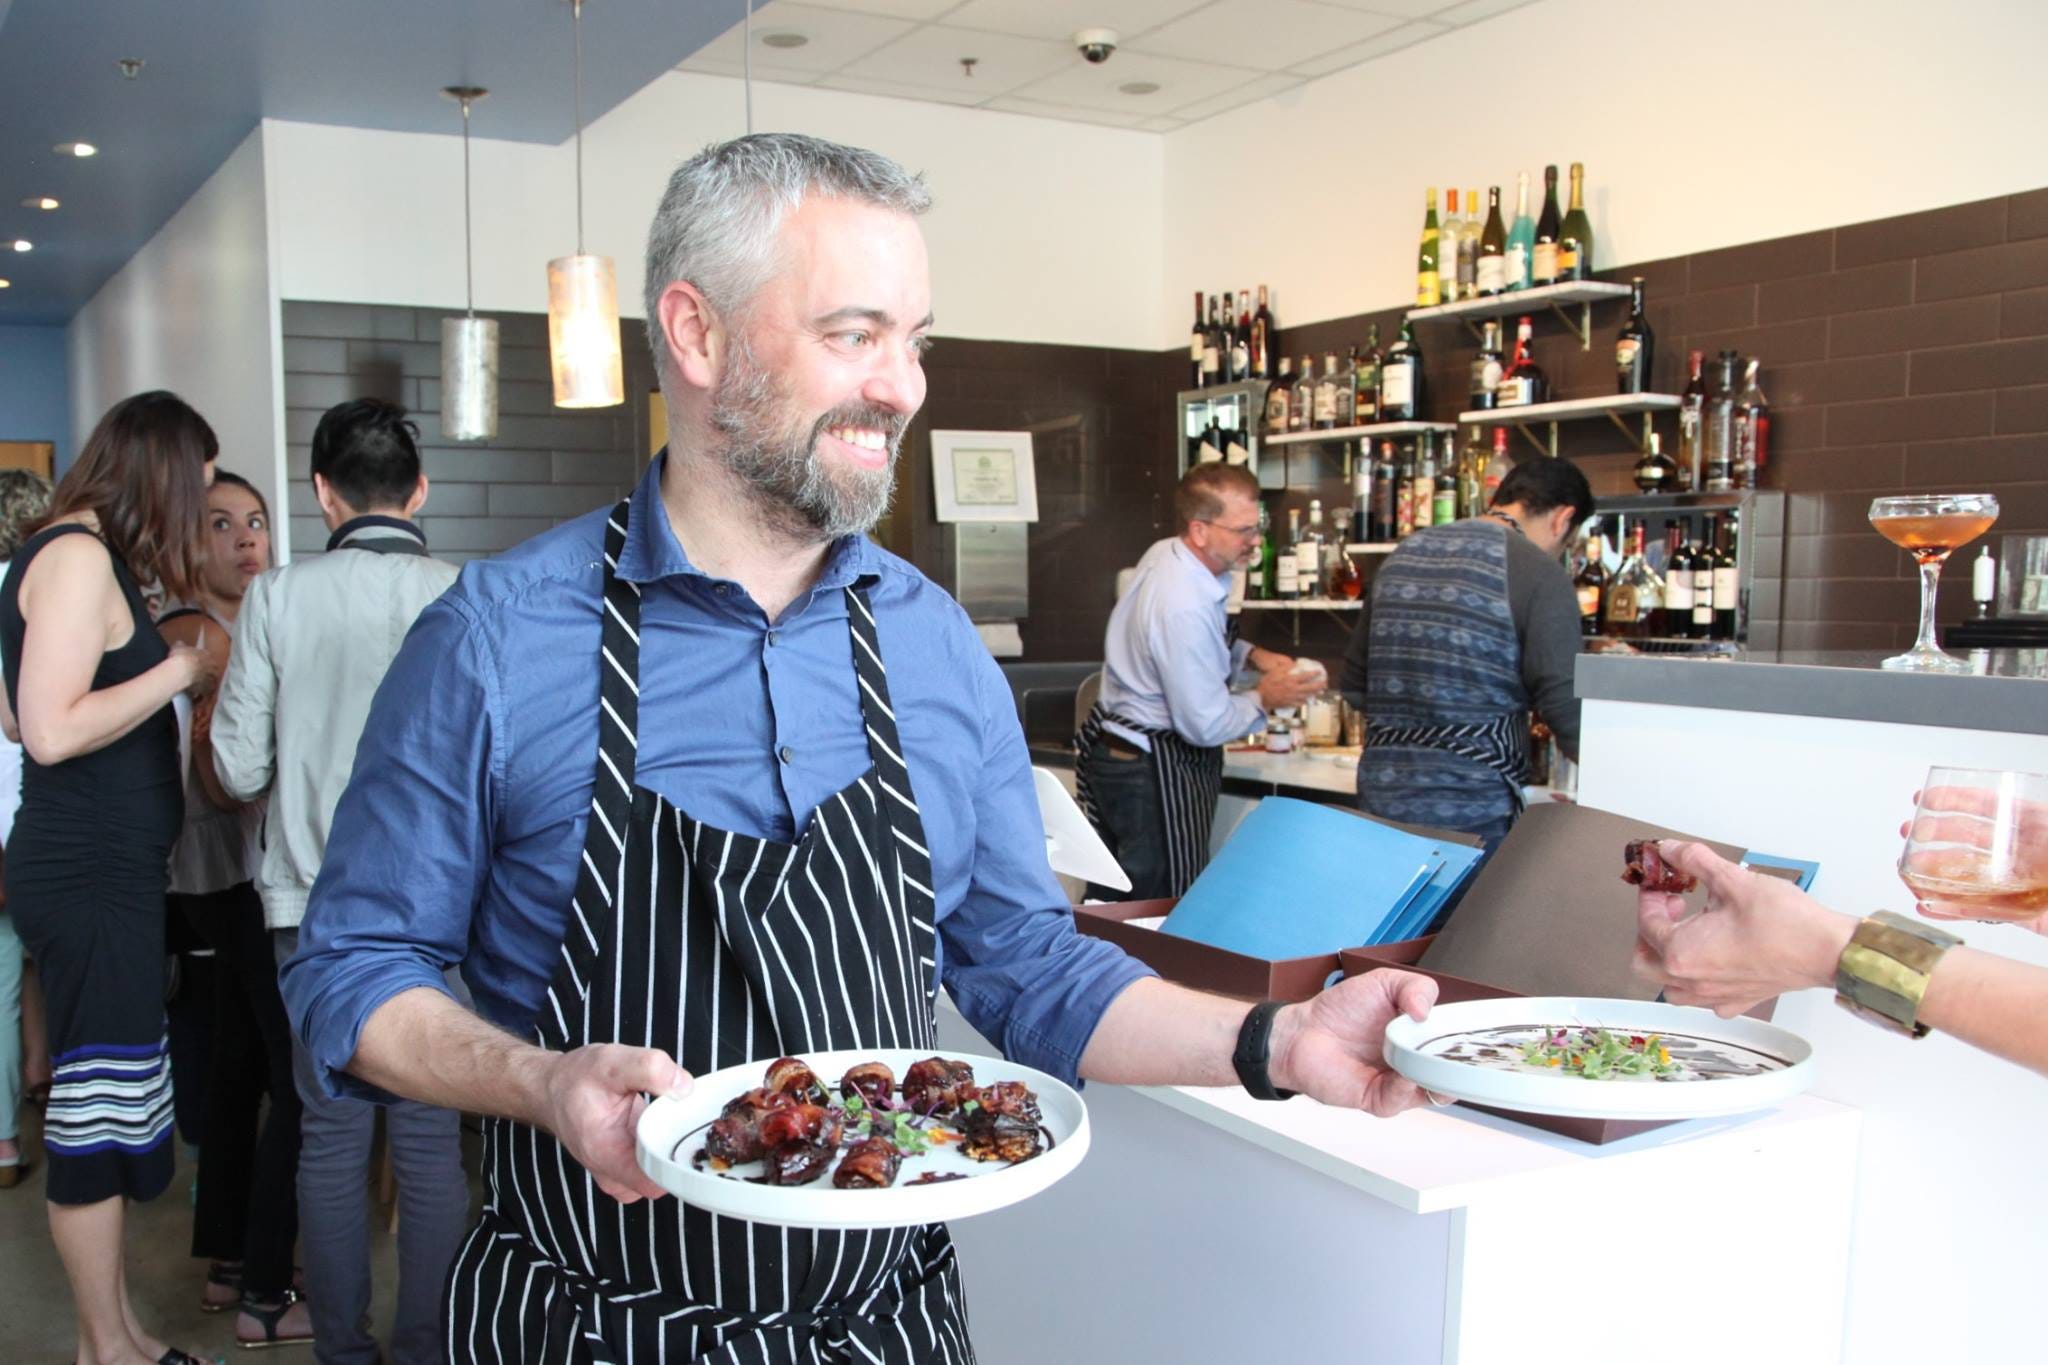 Phil Simonson, owner of Chocolate Lab, hands out food in restaurant.